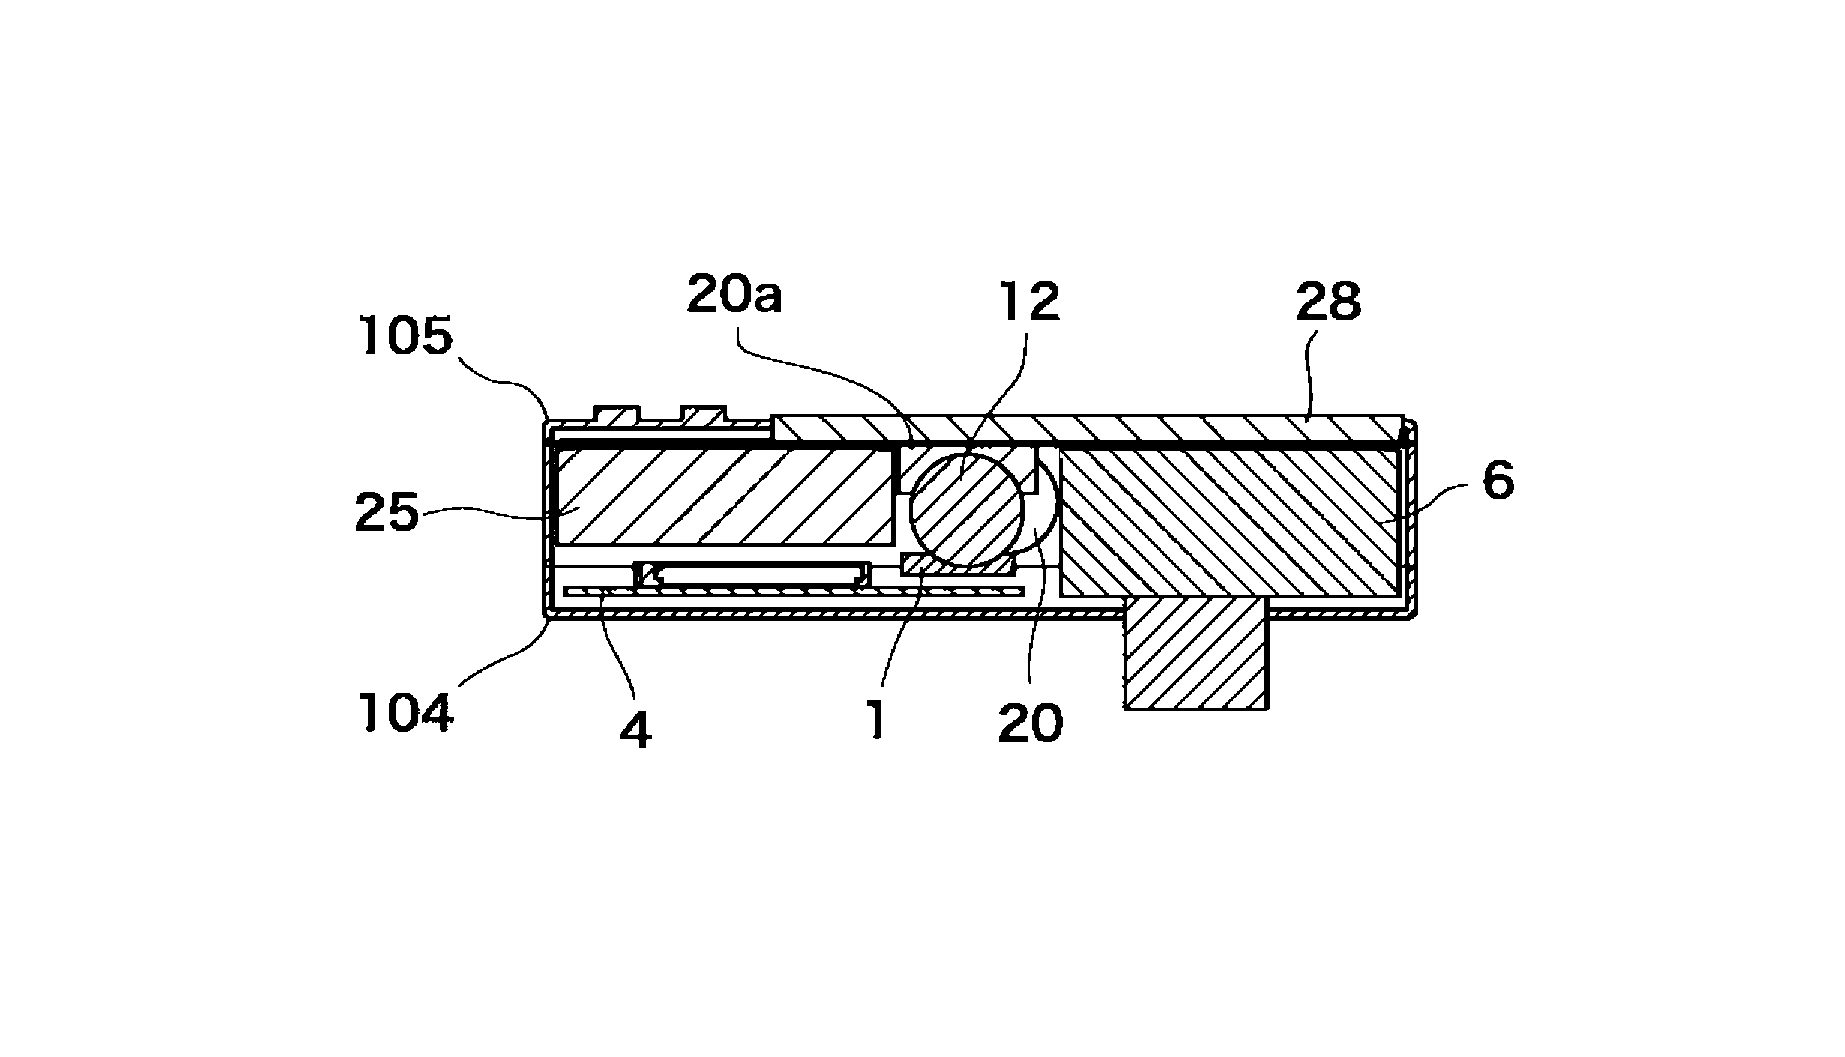 Image pickup apparatus capable of efficiently dissipating heat